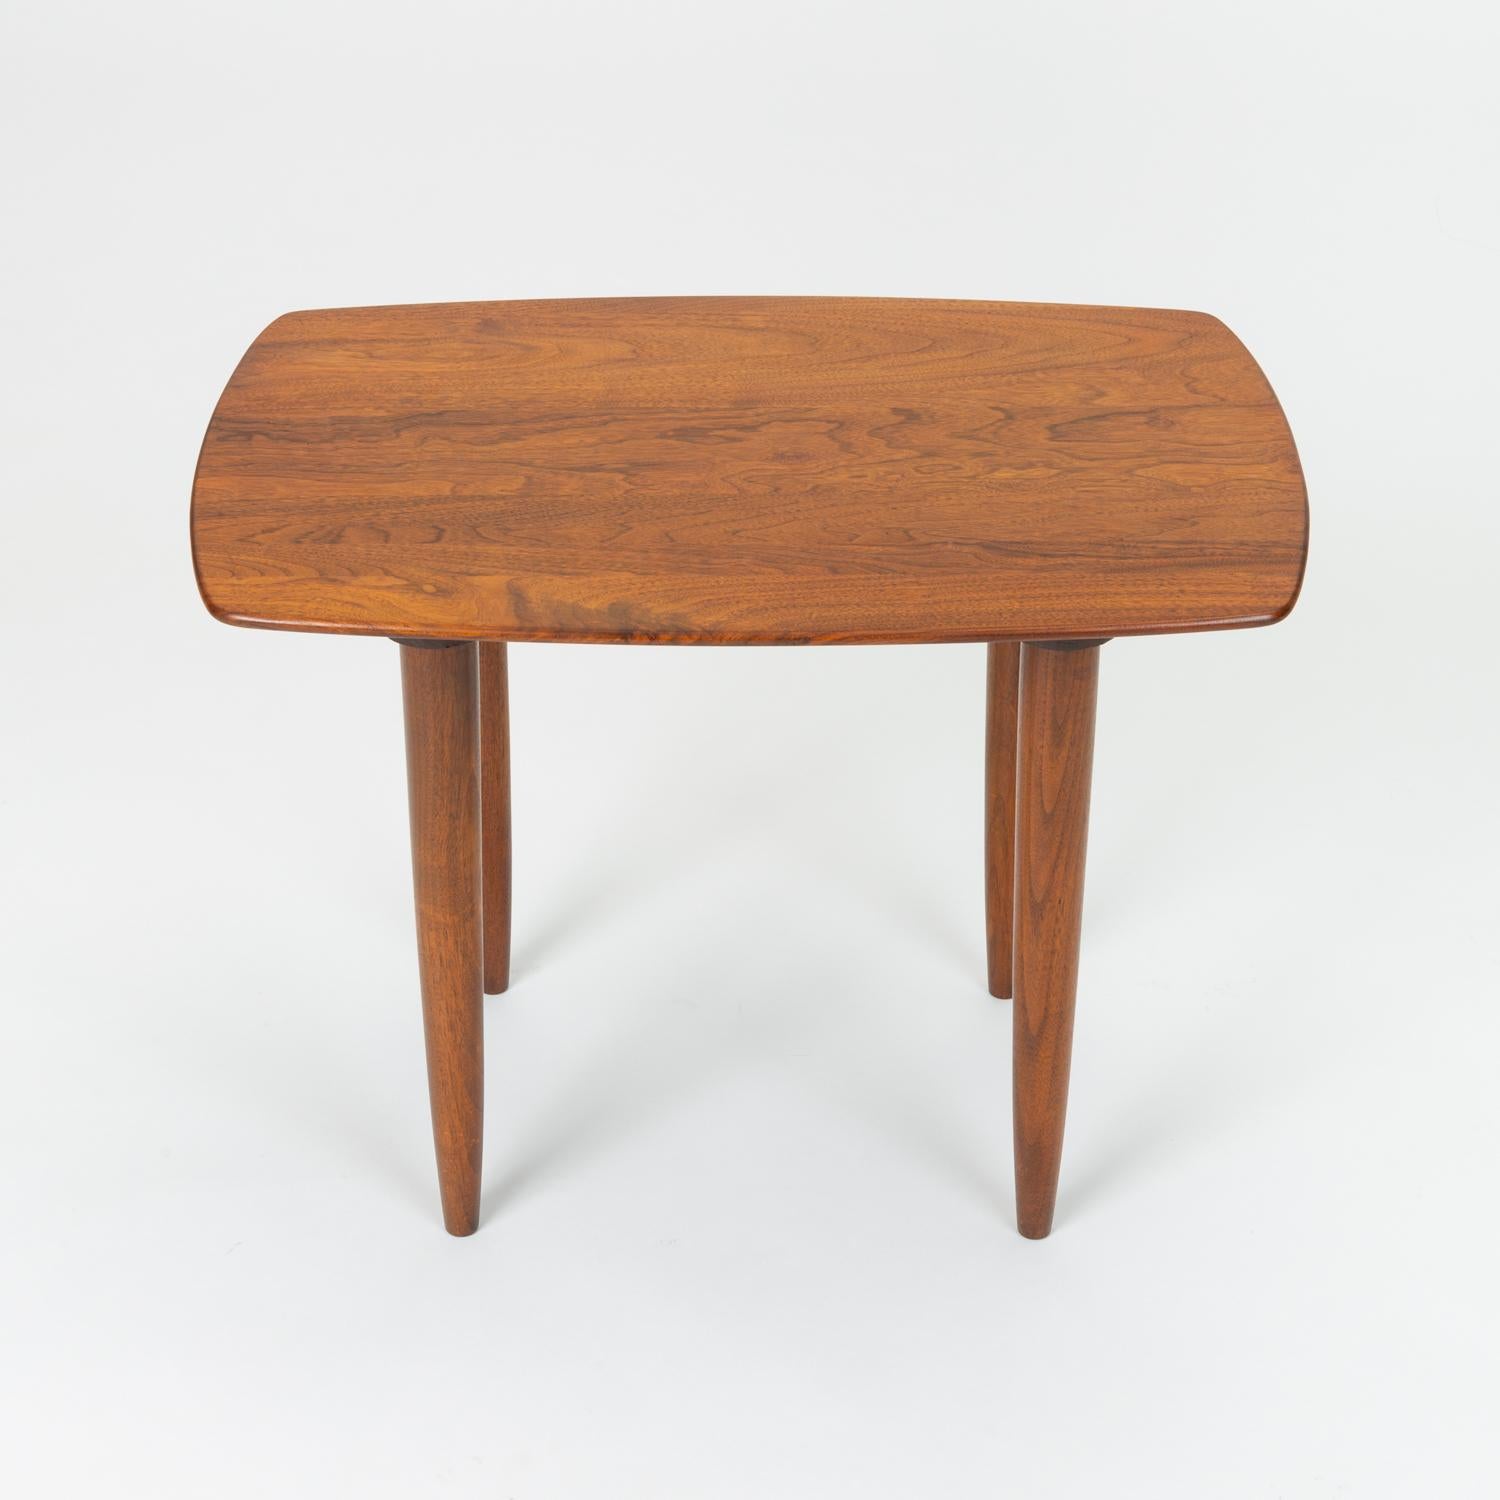 Produced by Ace-Hi of Gardena, Calif., the Prelude line of furniture featured solid walnut construction and simplified (but never reductive) purity of form. This Prelude table has a truncated surfboard shape, echoing the lines of their popular